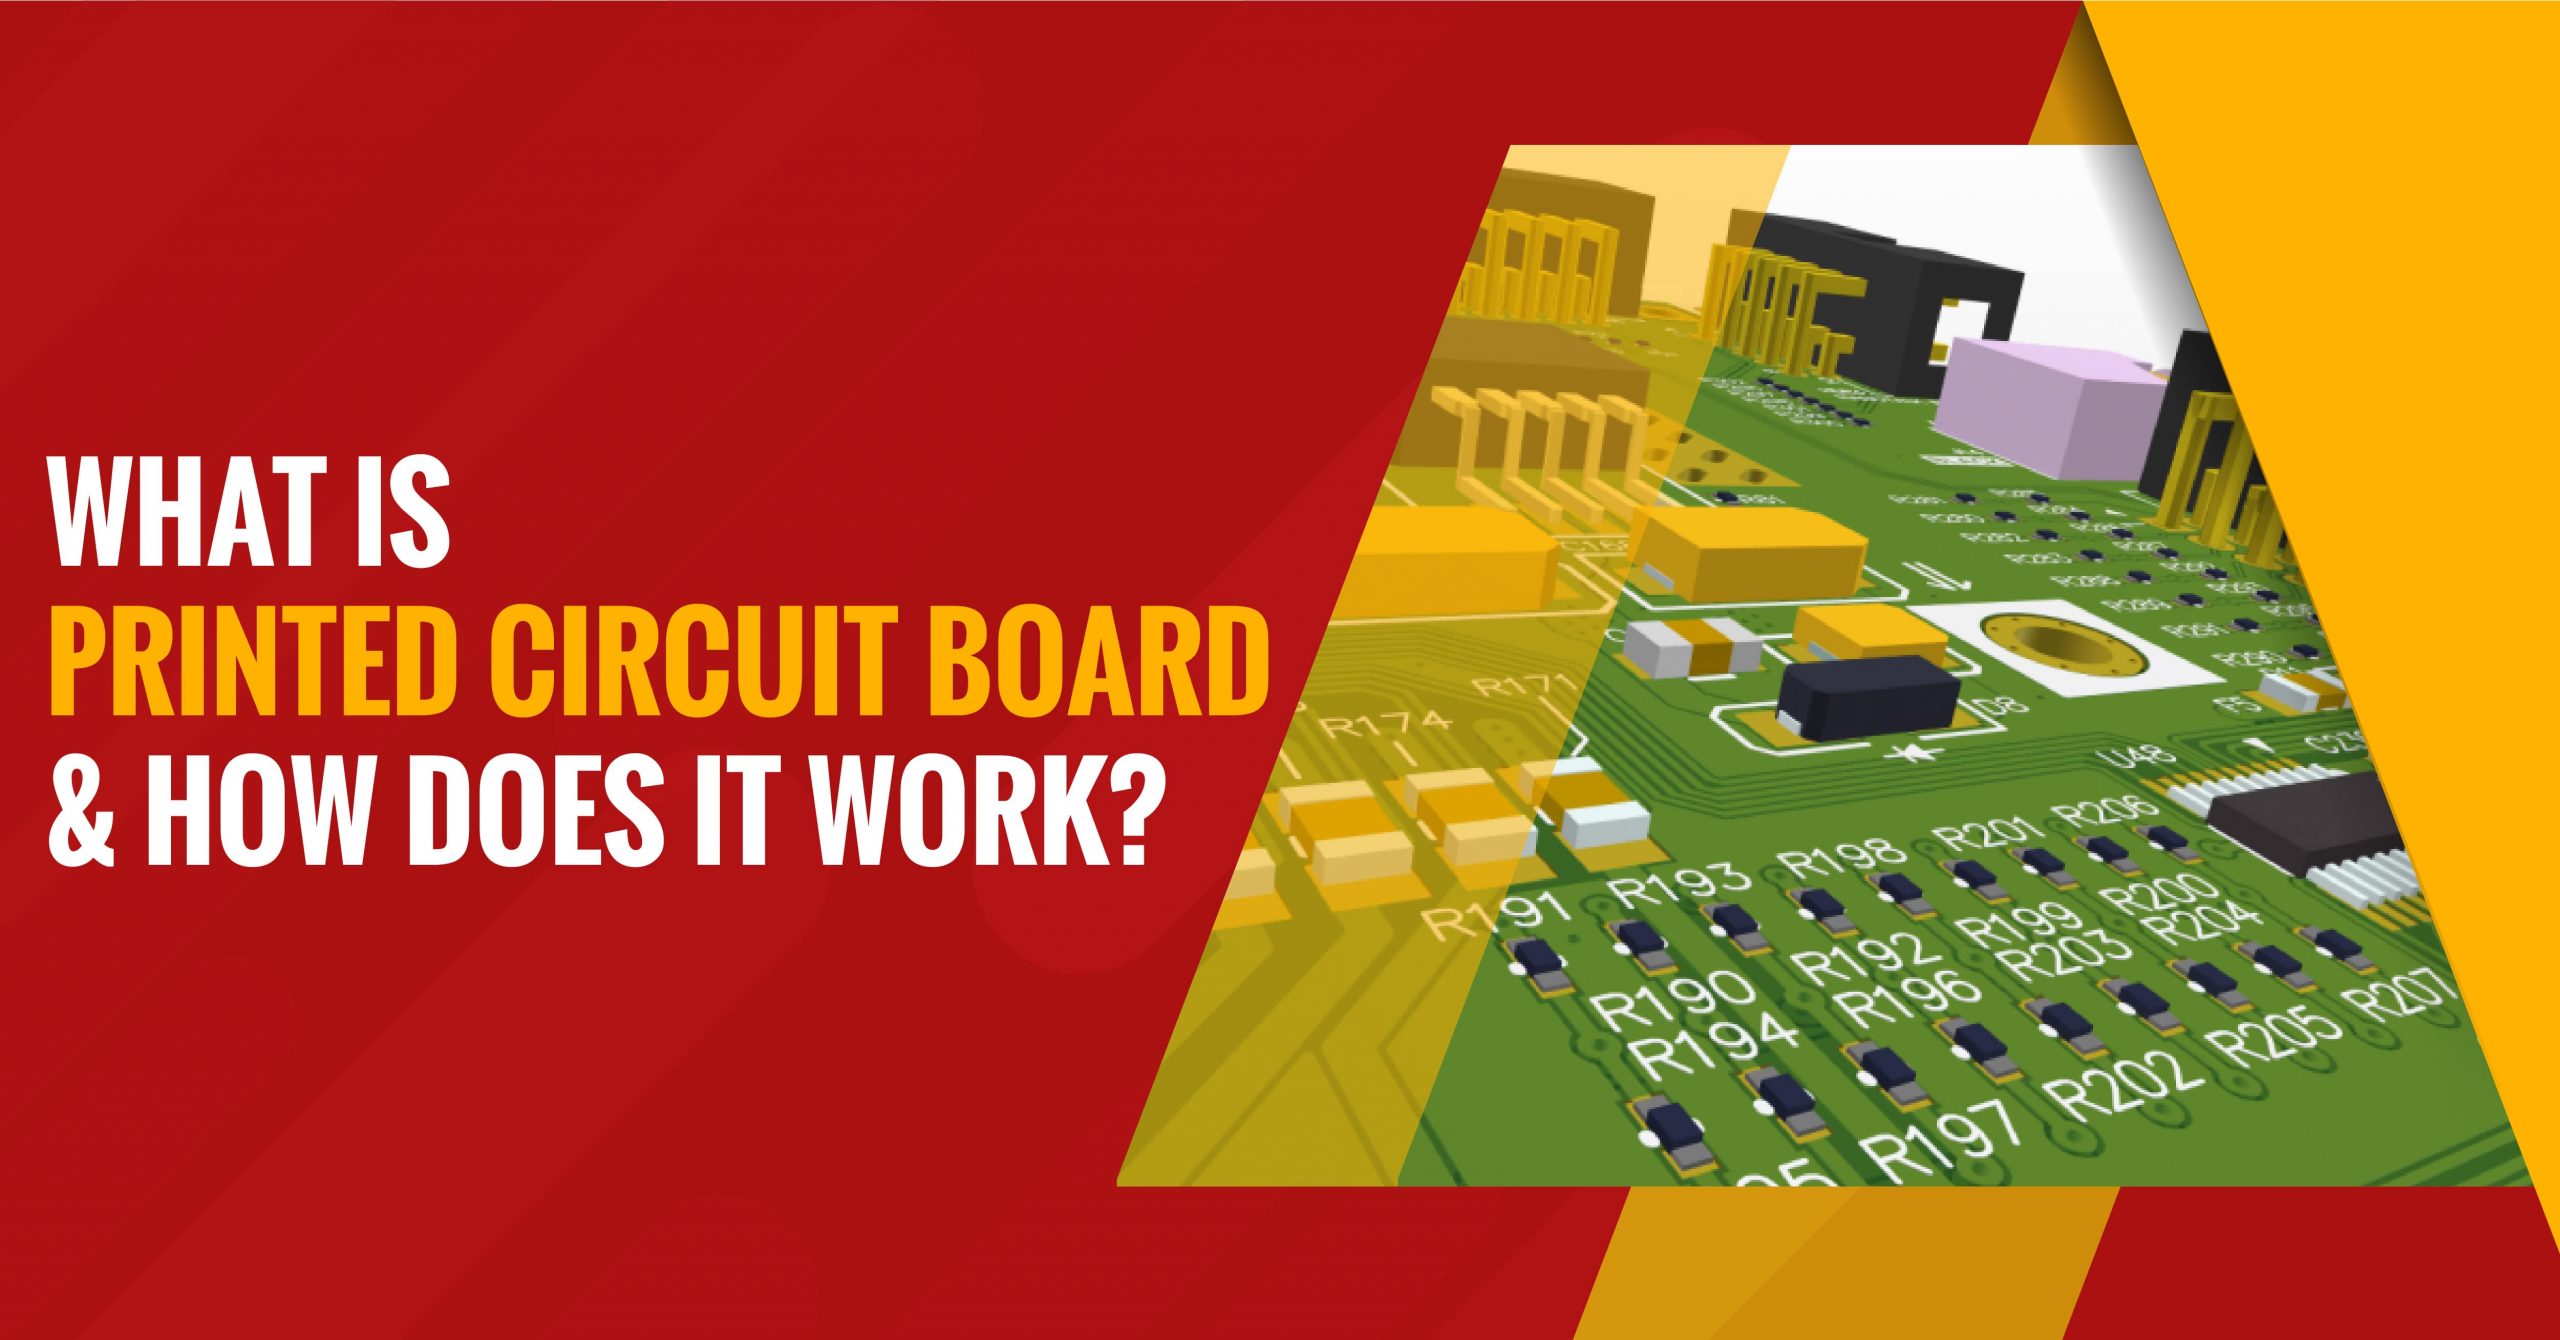 What Is Printed Circuit Board And Does It Work?